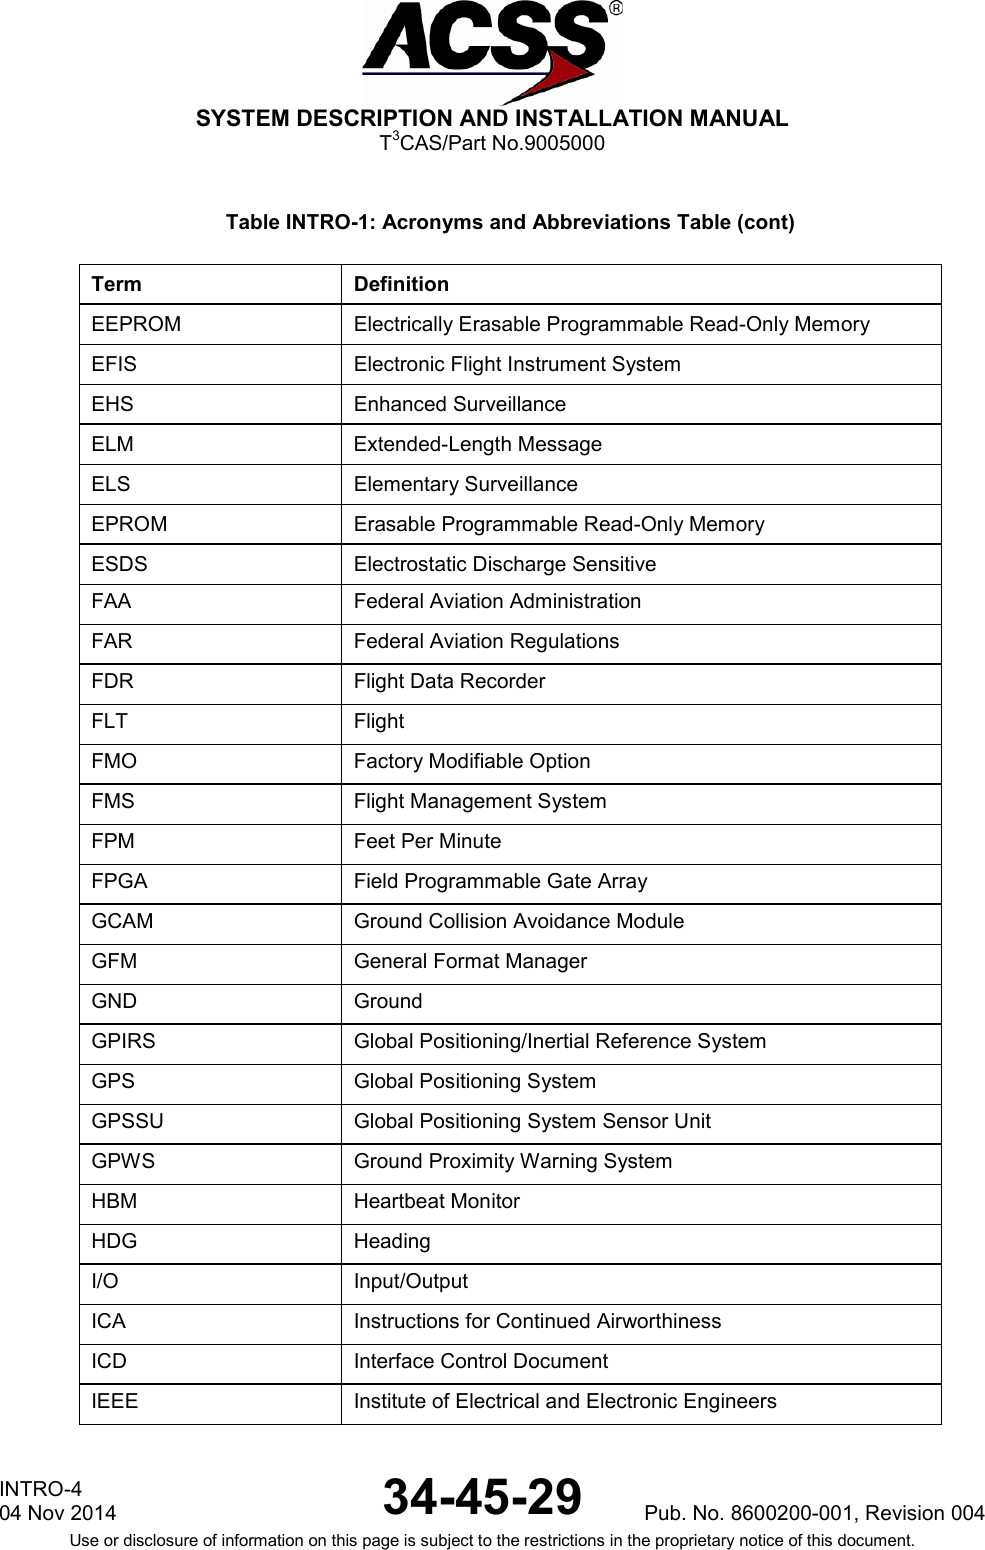  SYSTEM DESCRIPTION AND INSTALLATION MANUAL T3CAS/Part No.9005000 Table INTRO-1: Acronyms and Abbreviations Table (cont) Term Definition EEPROM Electrically Erasable Programmable Read-Only Memory EFIS Electronic Flight Instrument System EHS Enhanced Surveillance ELM  Extended-Length Message ELS Elementary Surveillance EPROM Erasable Programmable Read-Only Memory ESDS Electrostatic Discharge Sensitive FAA Federal Aviation Administration FAR Federal Aviation Regulations FDR Flight Data Recorder FLT Flight FMO Factory Modifiable Option FMS Flight Management System FPM Feet Per Minute FPGA Field Programmable Gate Array GCAM Ground Collision Avoidance Module GFM General Format Manager GND Ground GPIRS Global Positioning/Inertial Reference System GPS Global Positioning System GPSSU Global Positioning System Sensor Unit GPWS Ground Proximity Warning System HBM Heartbeat Monitor HDG Heading I/O Input/Output ICA Instructions for Continued Airworthiness ICD Interface Control Document IEEE Institute of Electrical and Electronic Engineers INTRO-4 04 Nov 2014 34-45-29 Pub. No. 8600200-001, Revision 004  Use or disclosure of information on this page is subject to the restrictions in the proprietary notice of this document.   